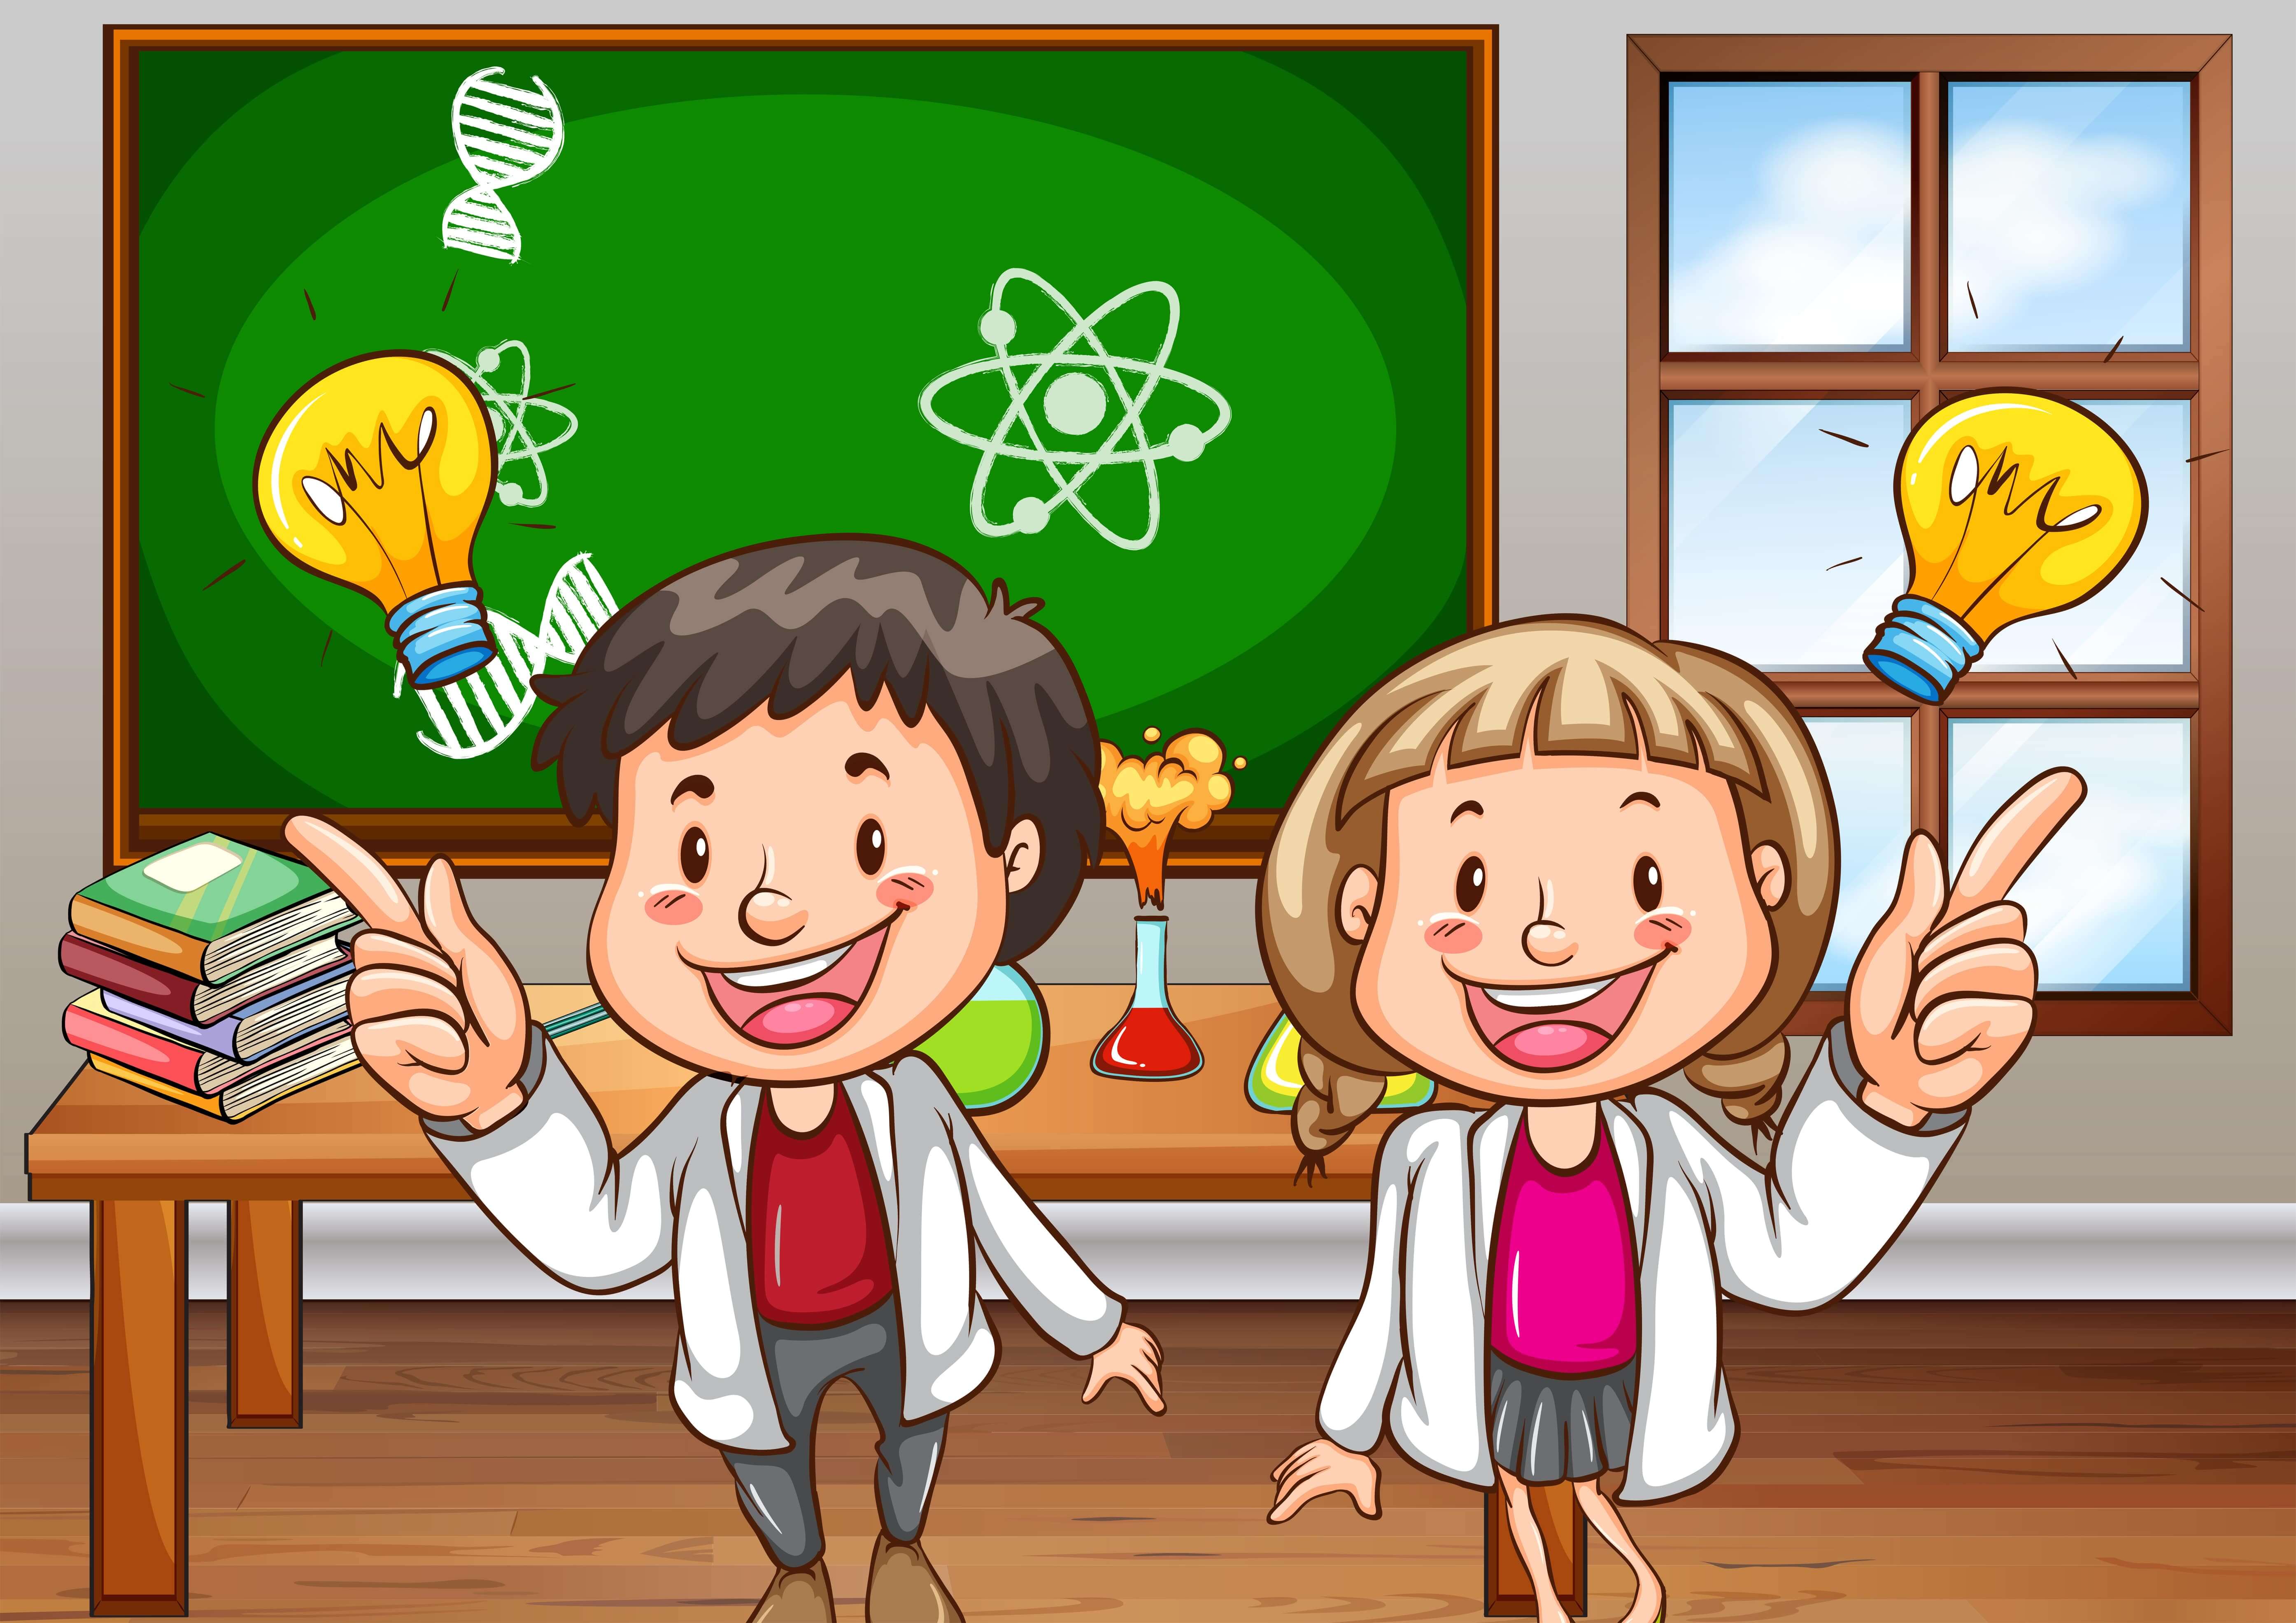 Cartoon of two kids in lab giving expression as if they got an idea